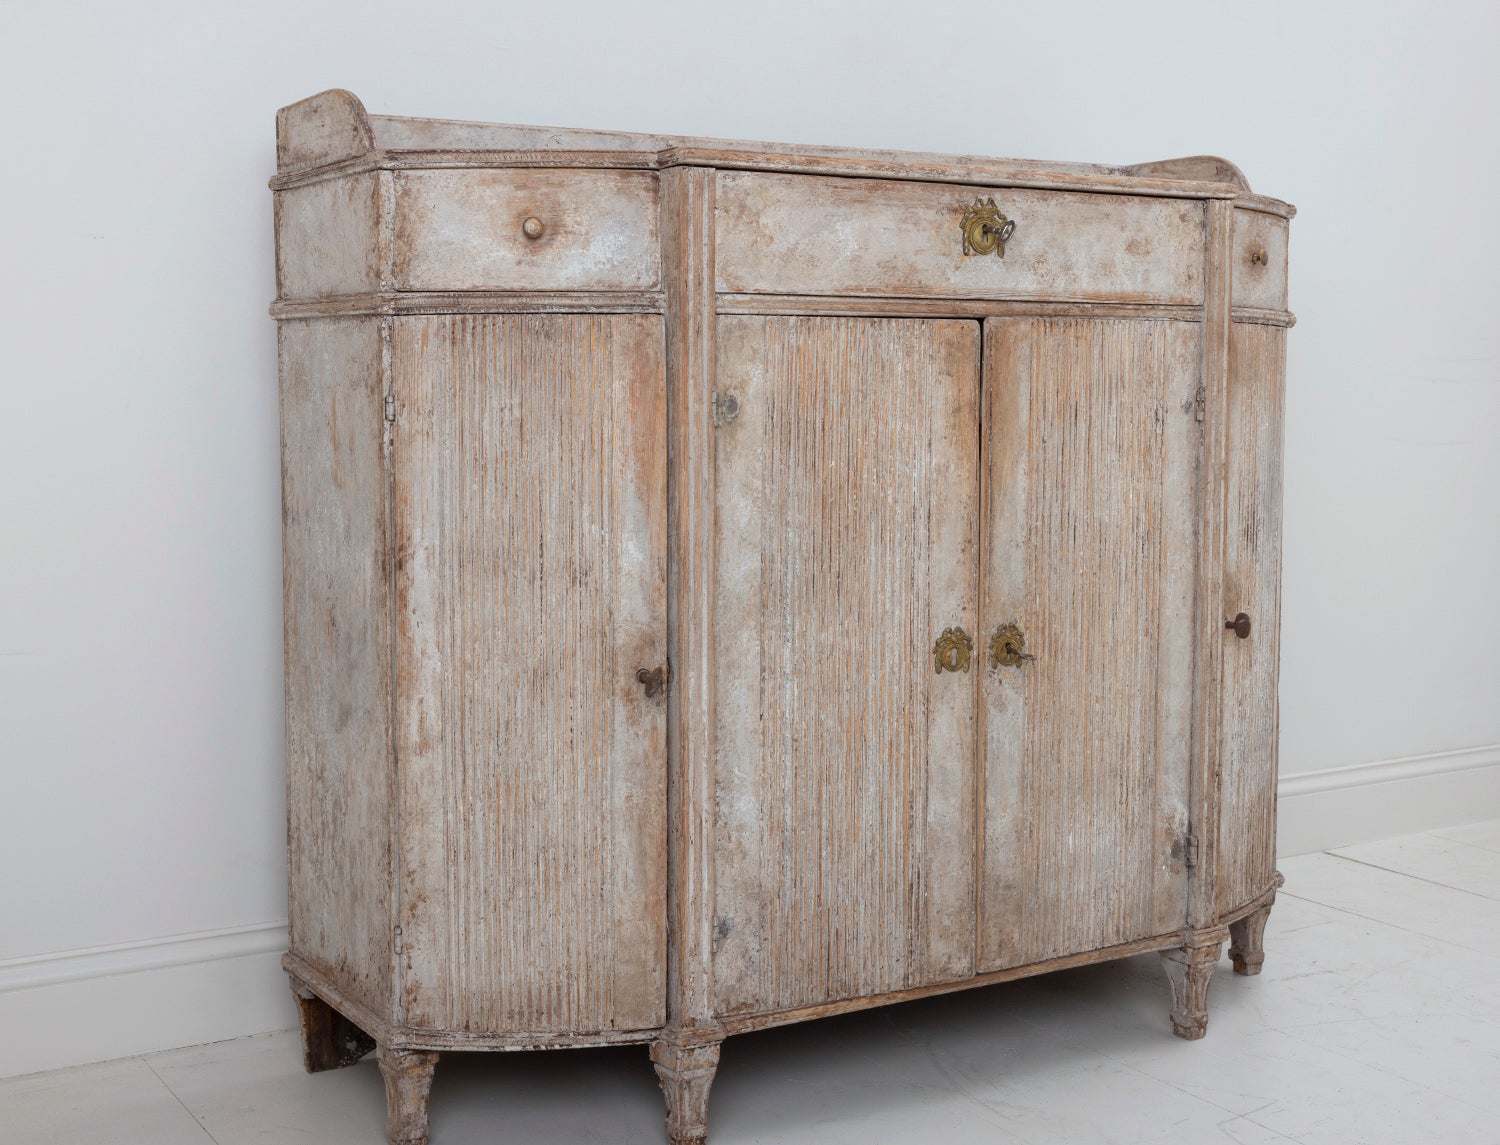 A Swedish demilune sideboard or server from the Gustavian period. The patina is a beautiful soft gray with natural wood showing through in areas. The buffet has three drawers. Four reeded doors open to reveal one center shelf and two side shelves,